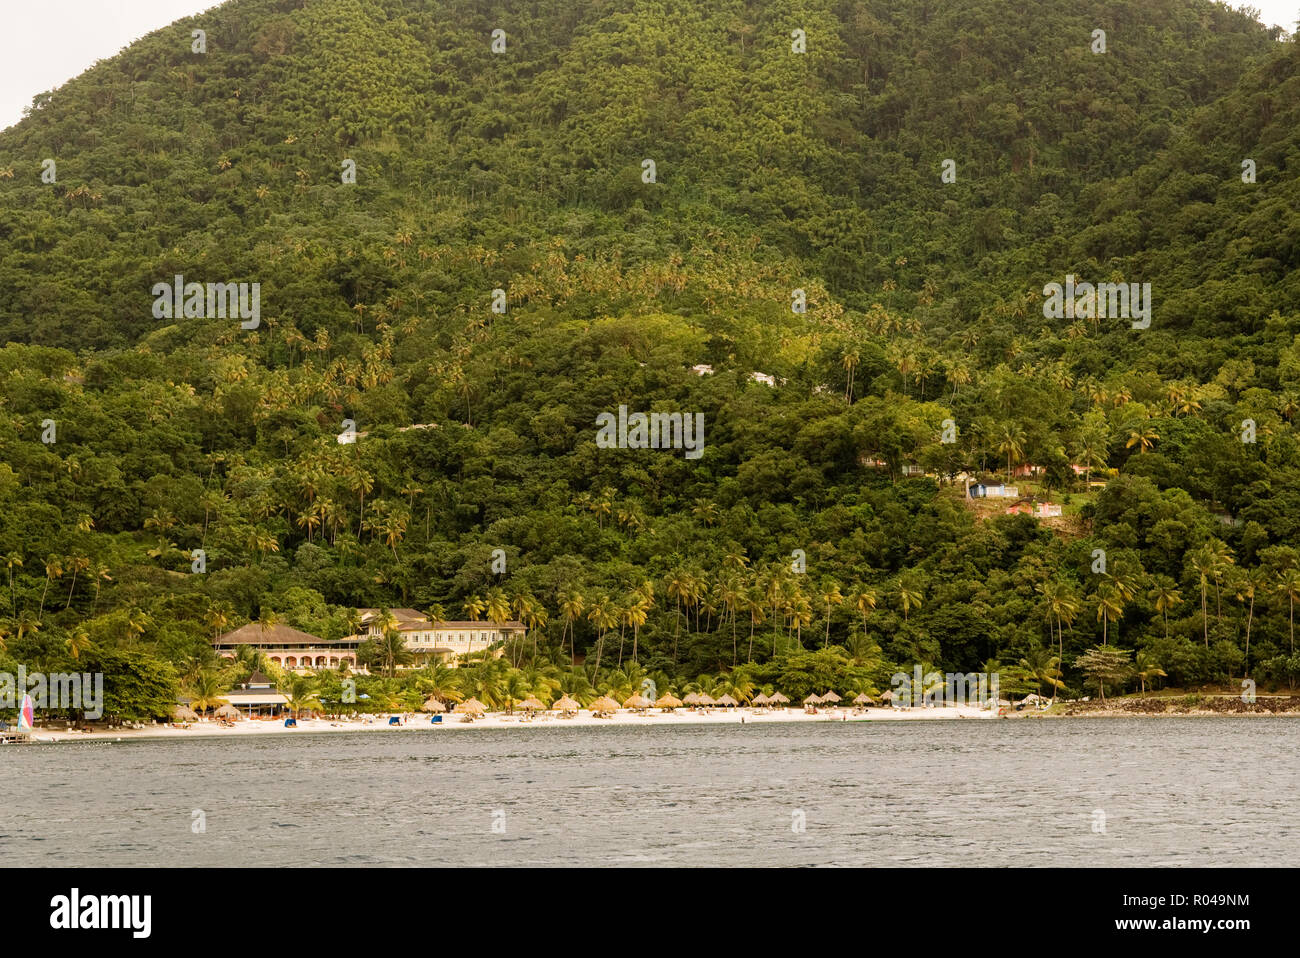 Resort on beach by forest Stock Photo